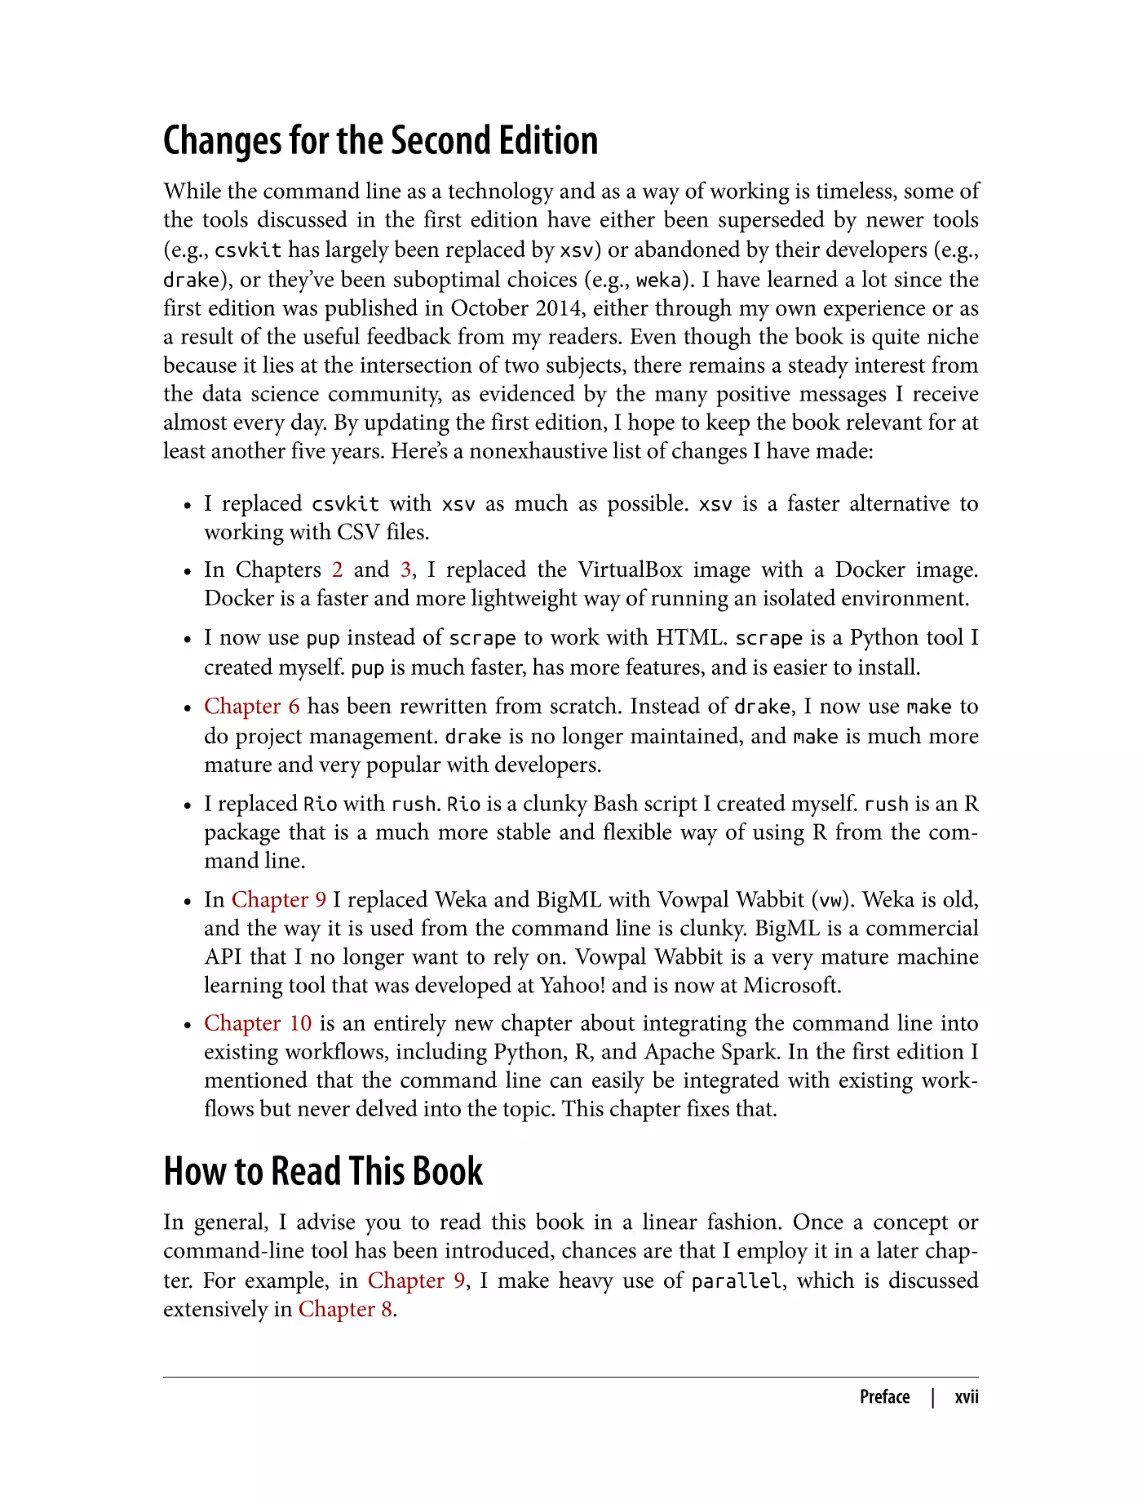 Changes for the Second Edition
How to Read This Book